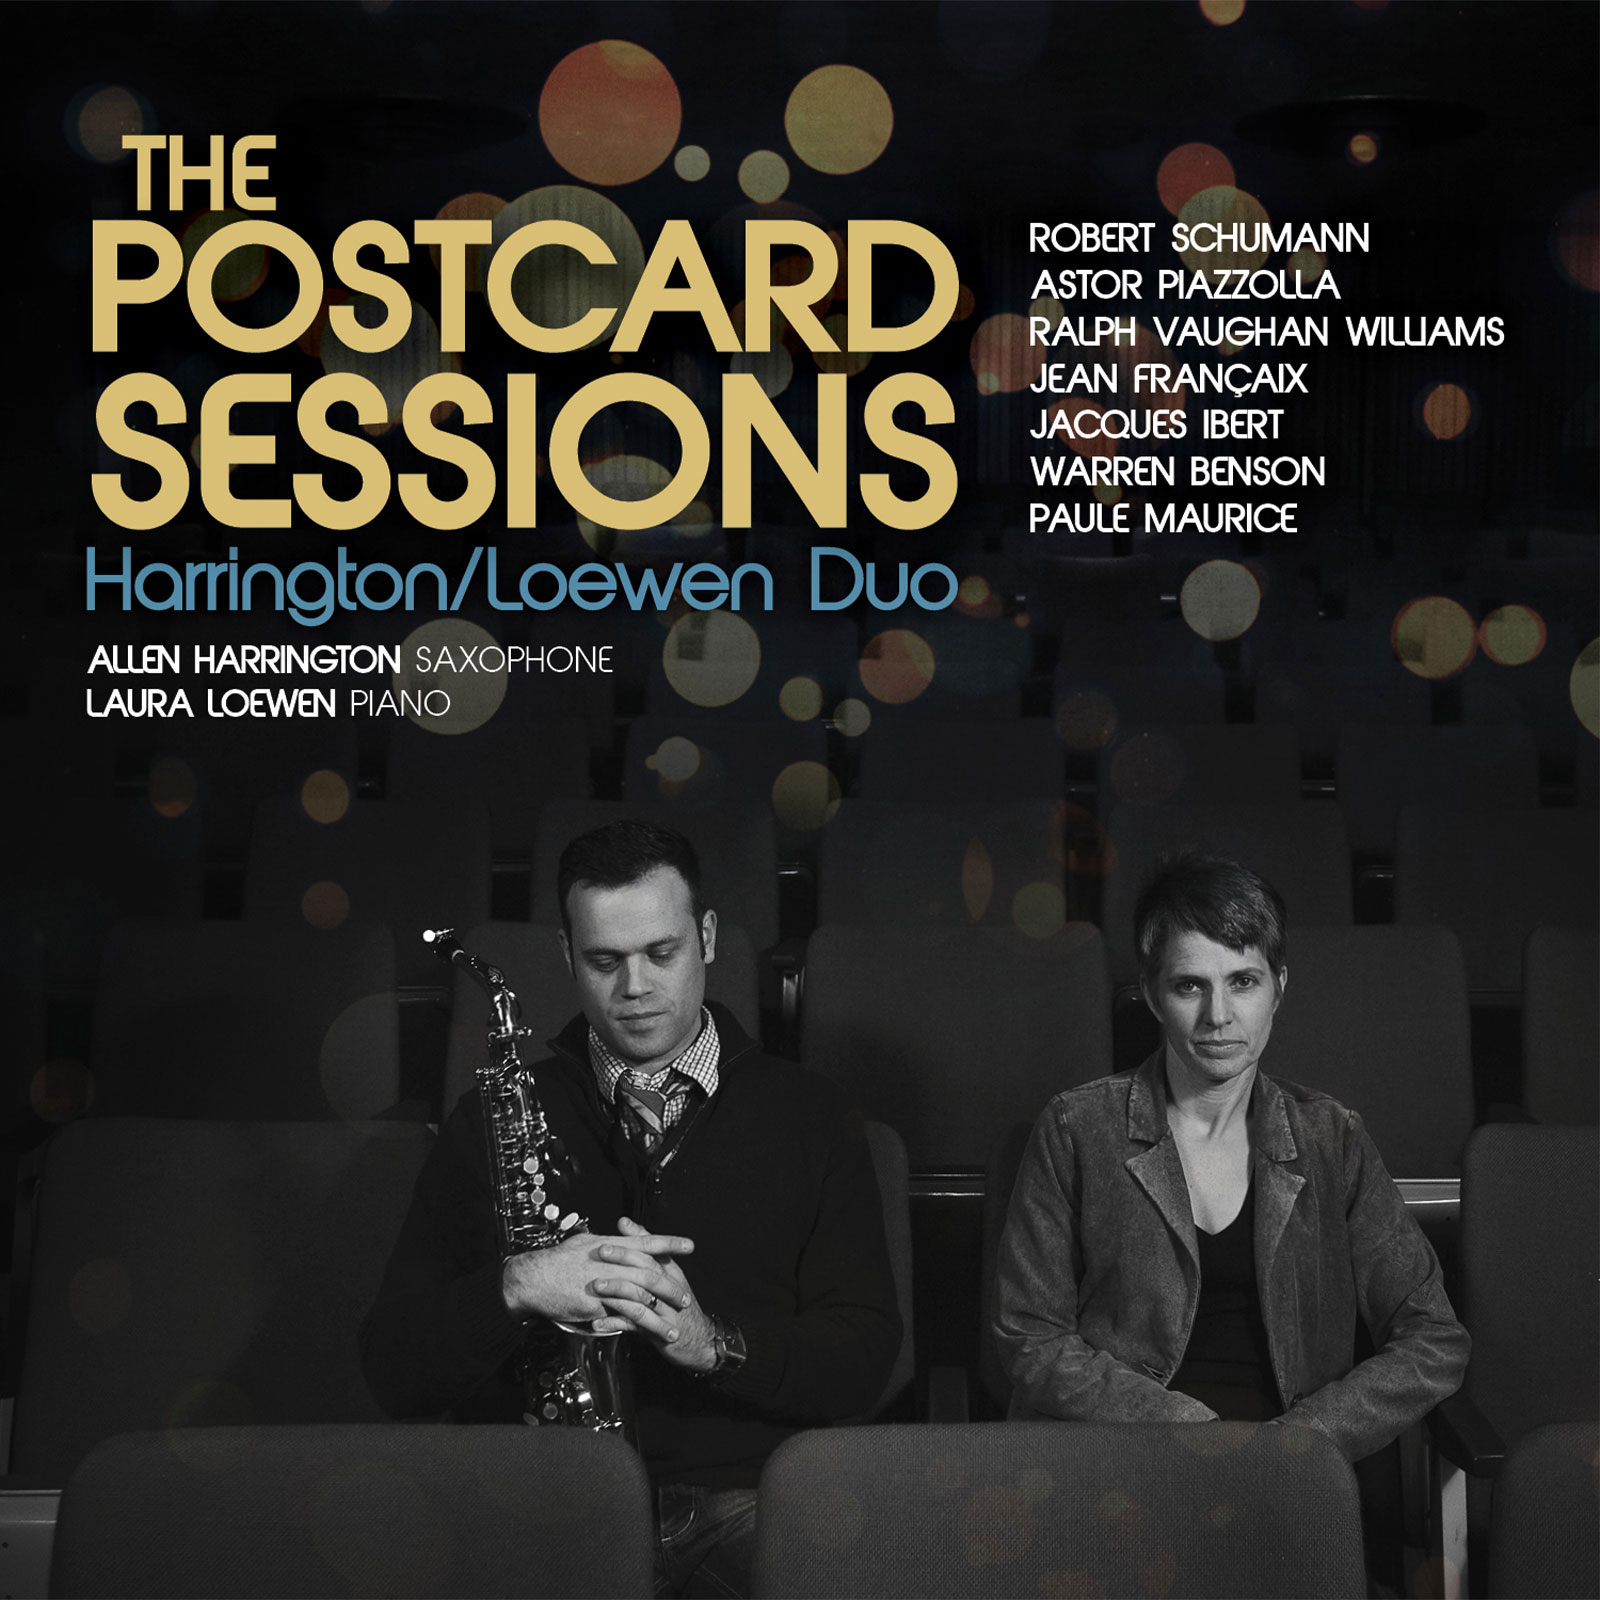 The Postcard Sessions